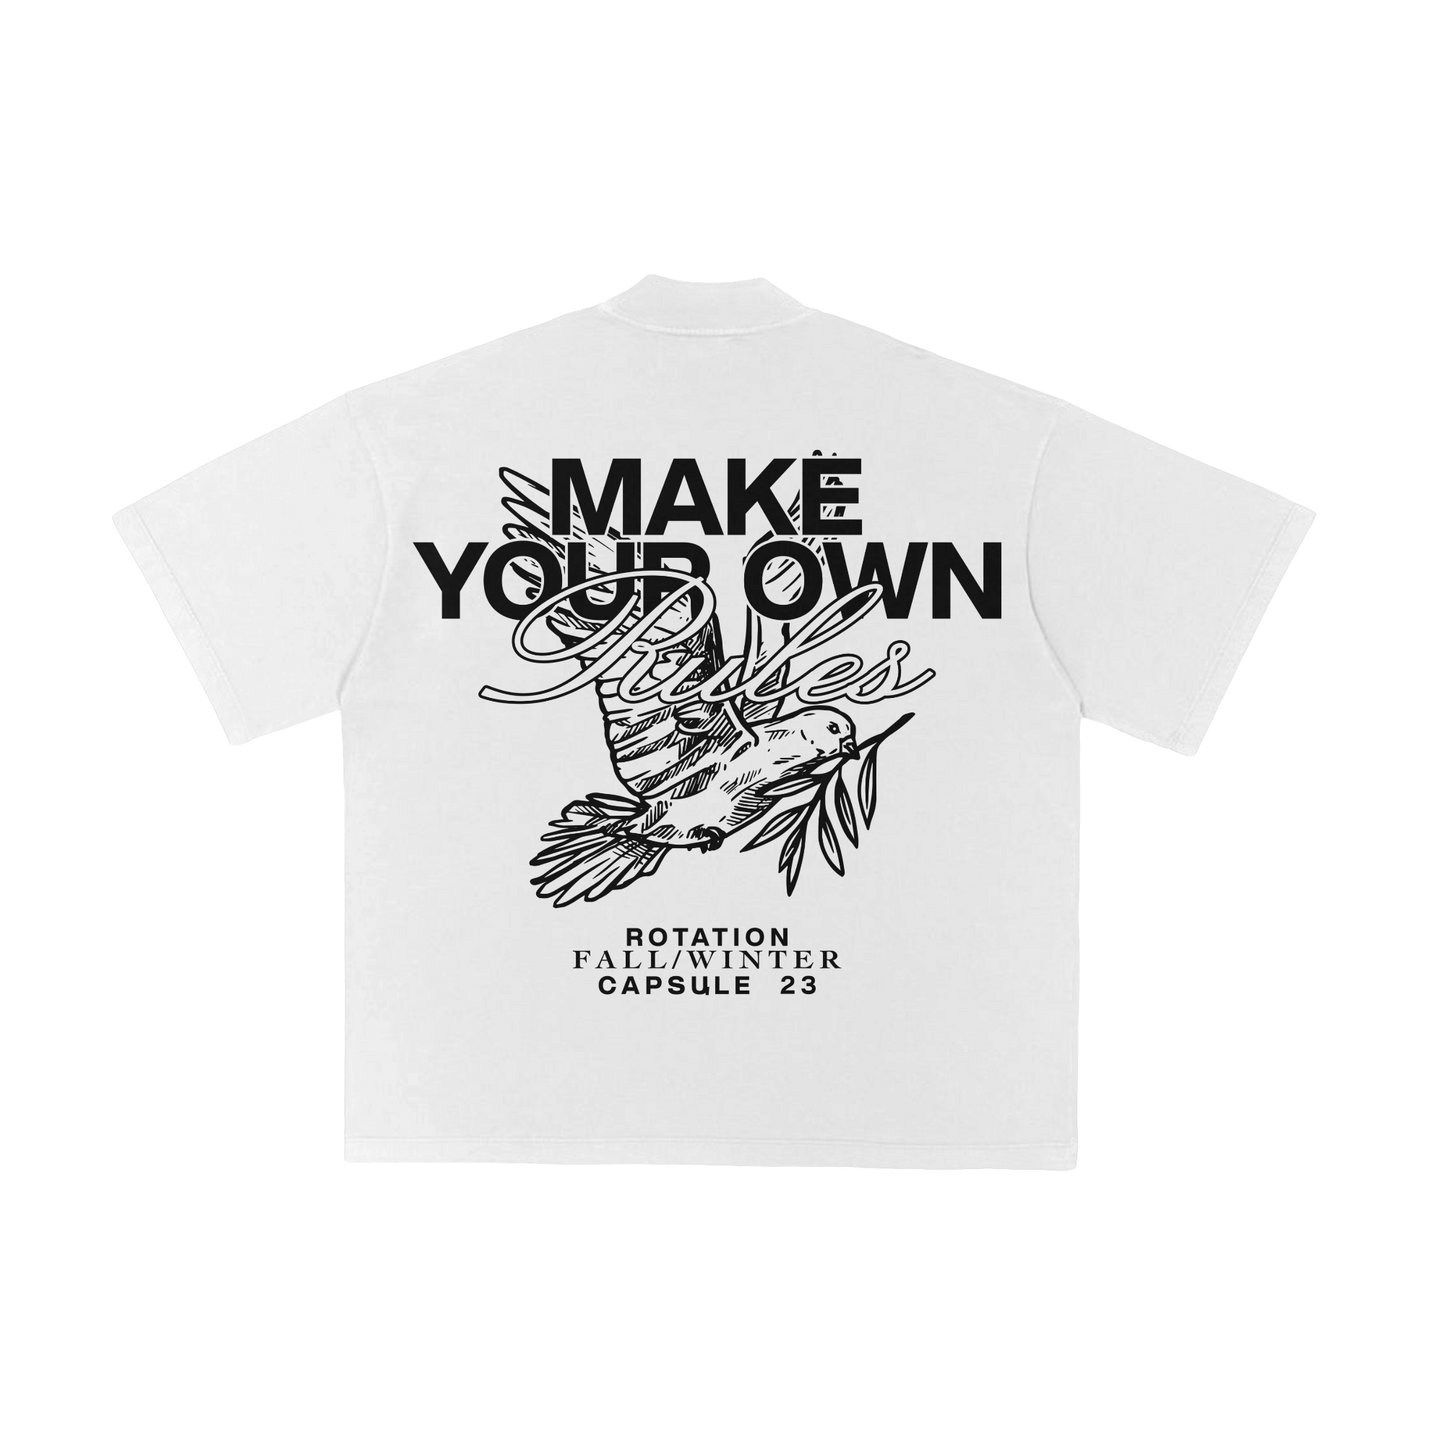 Make Your Own Rules T-Shirt White